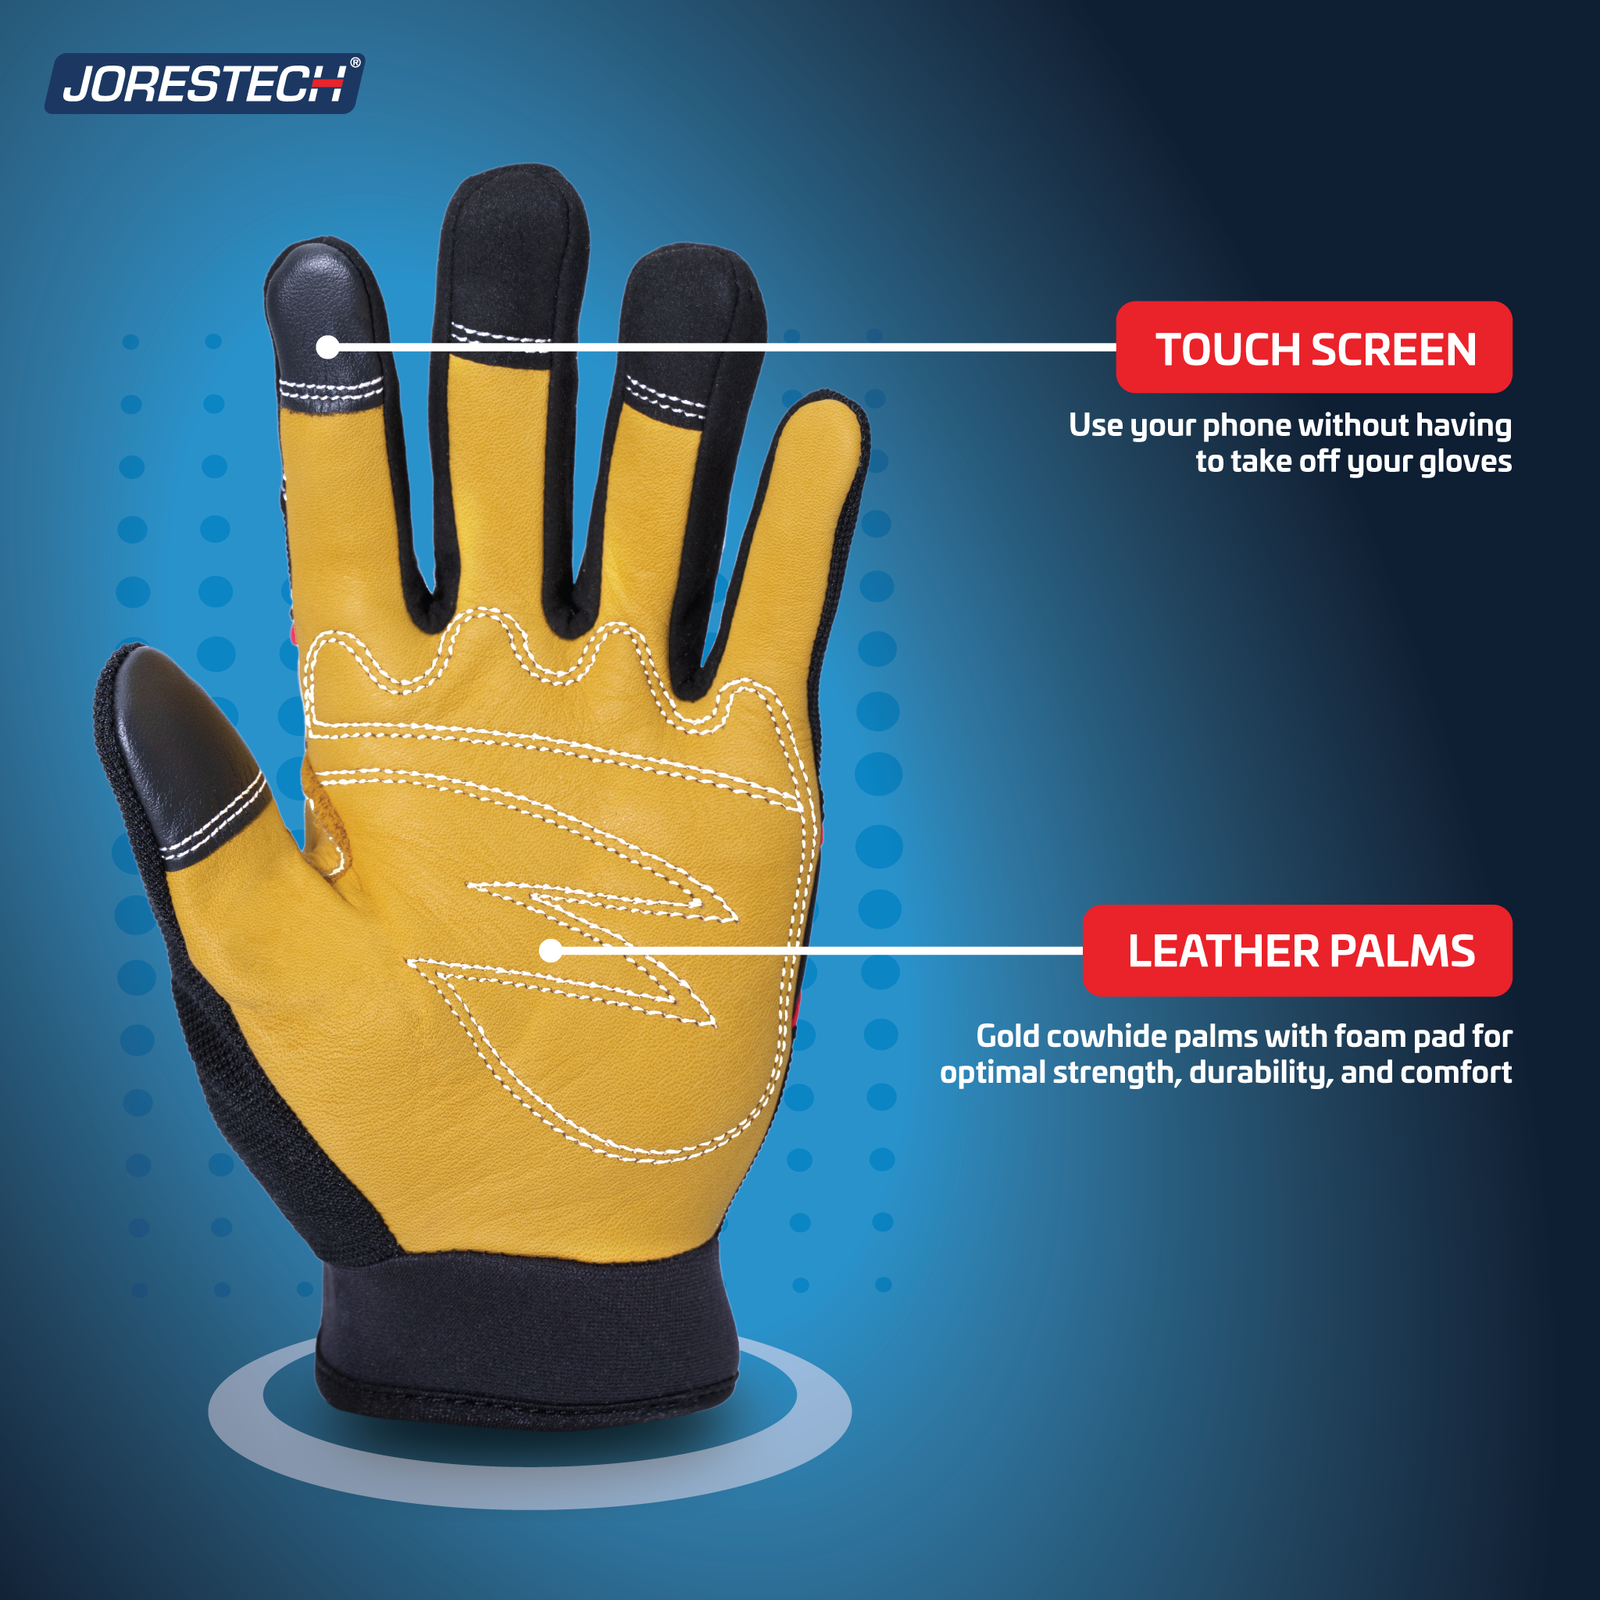 Touchscreen safety work glove with gold cowhide palm and foam padding for protection, durability and strength